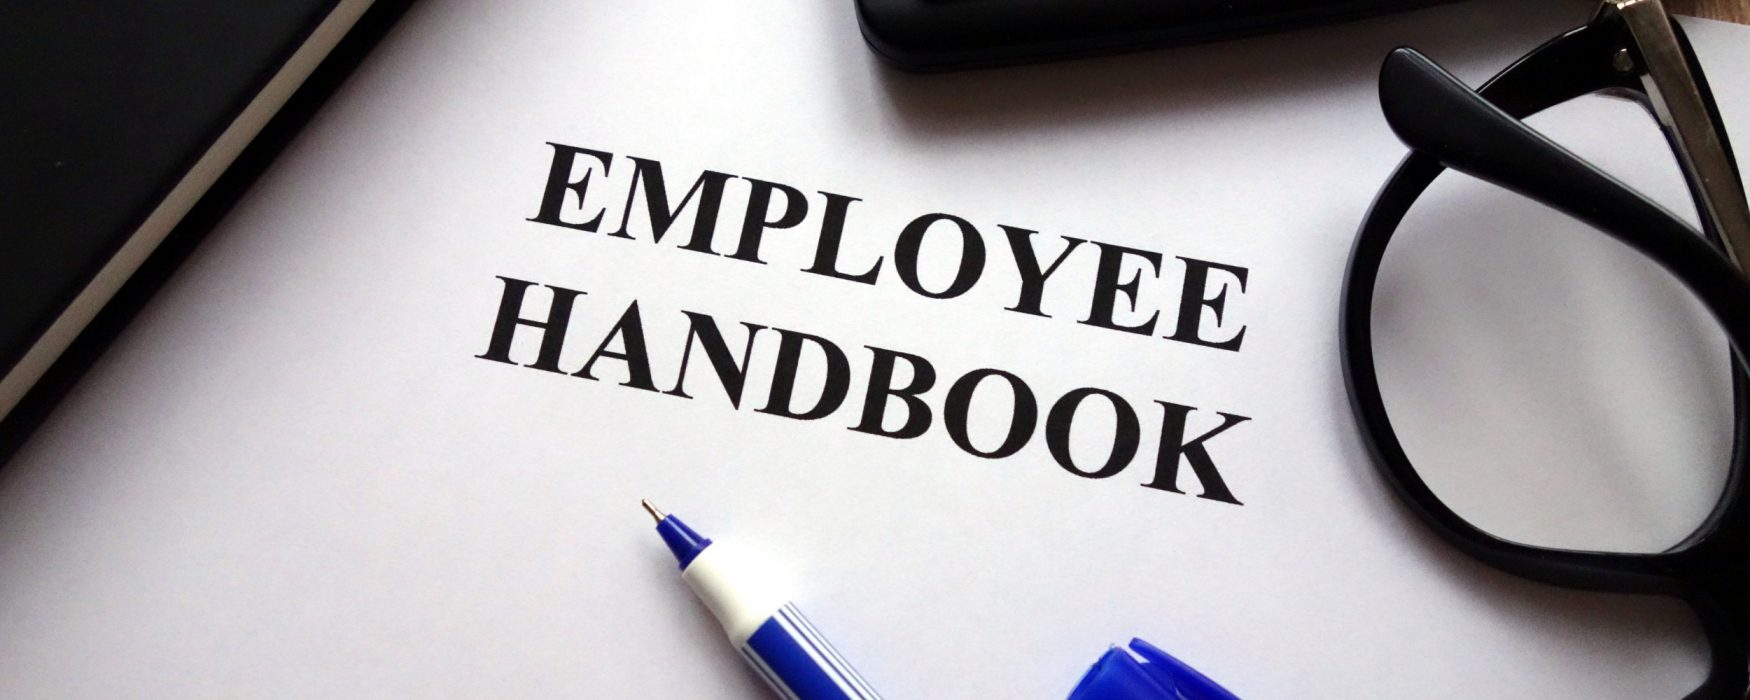 Image of a piece of paper with the words "employee handbook" printed on it